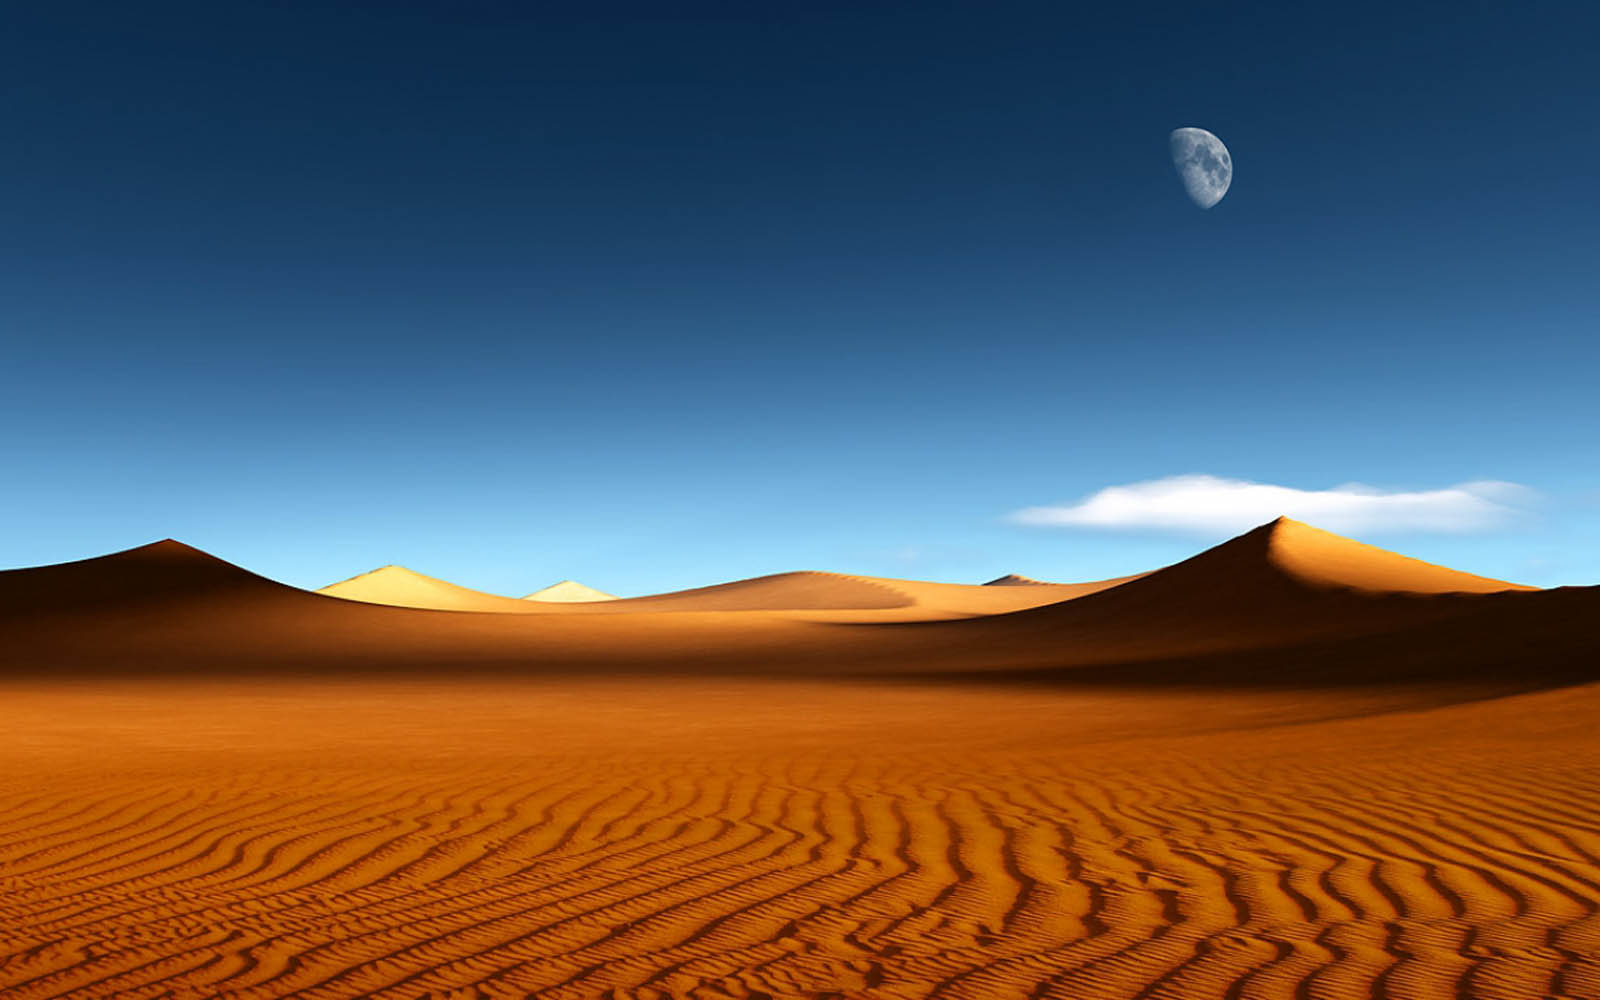 Tag Desert Wallpapers Backgrounds Photos Picturesand Images for